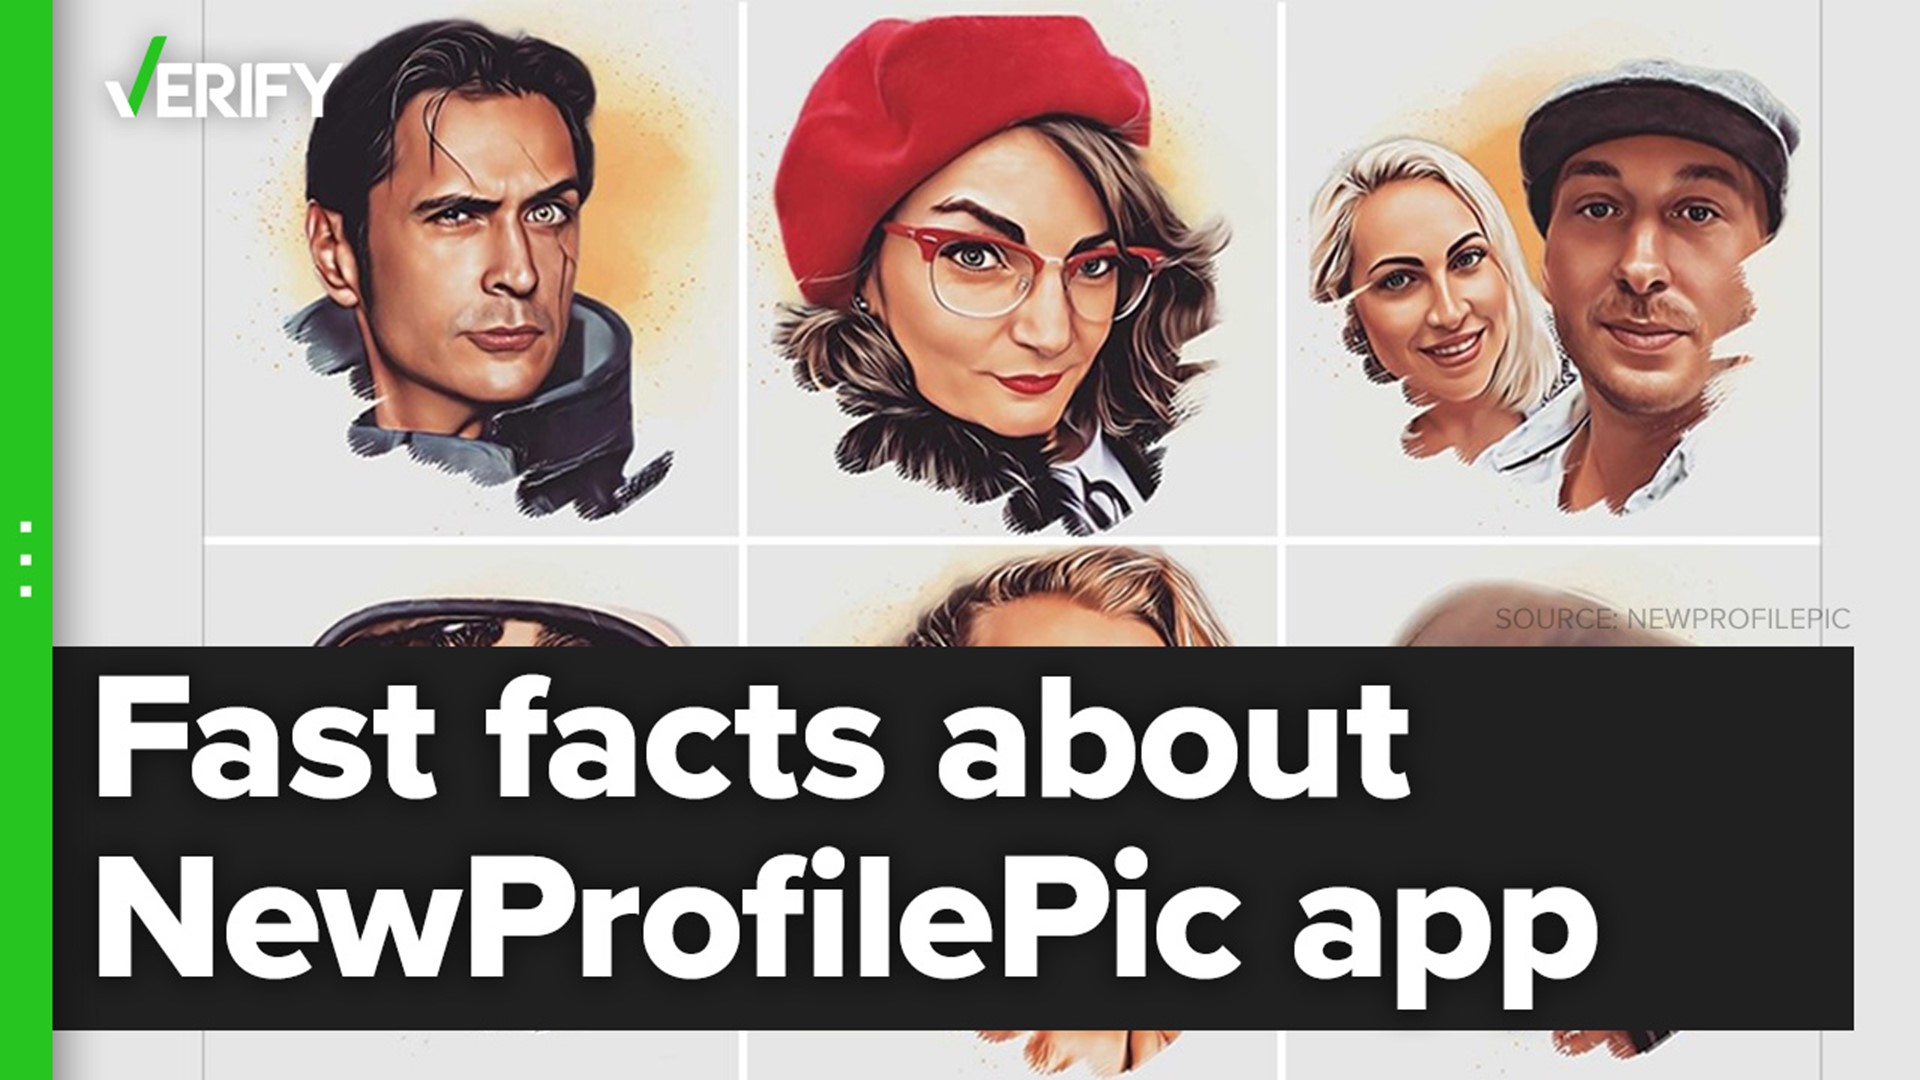 Some VERIFY viewers wondered if the photo editing app NewProfilePic has ties to Russia, and asked about its privacy policy. Here is what we found out.